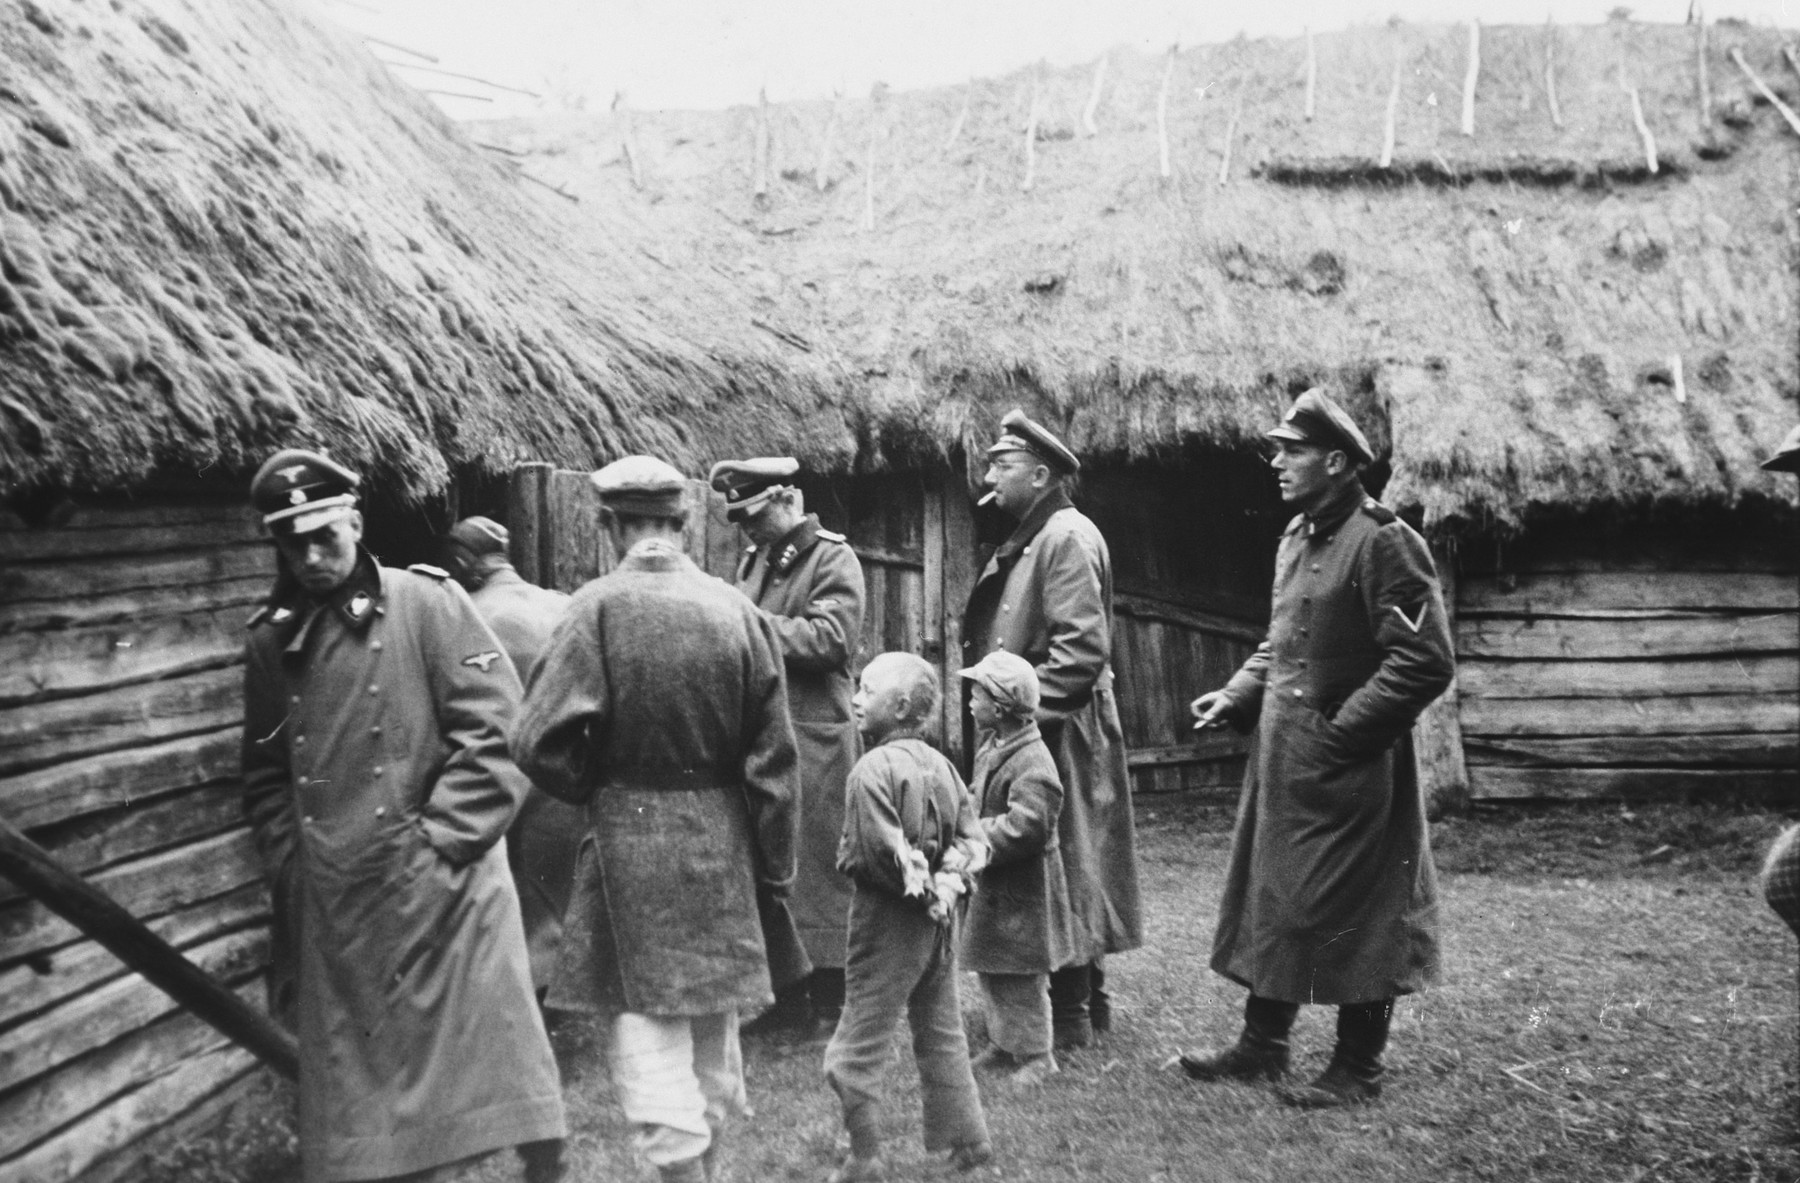 SS officers inspect Russian farmhouses while two children and a civilian look on.

The caption of the SS-Archiv says "Russische Bauernhaeuser in der Prim Okt. 1941" (Russian farmhouses in the Prim October 1941).